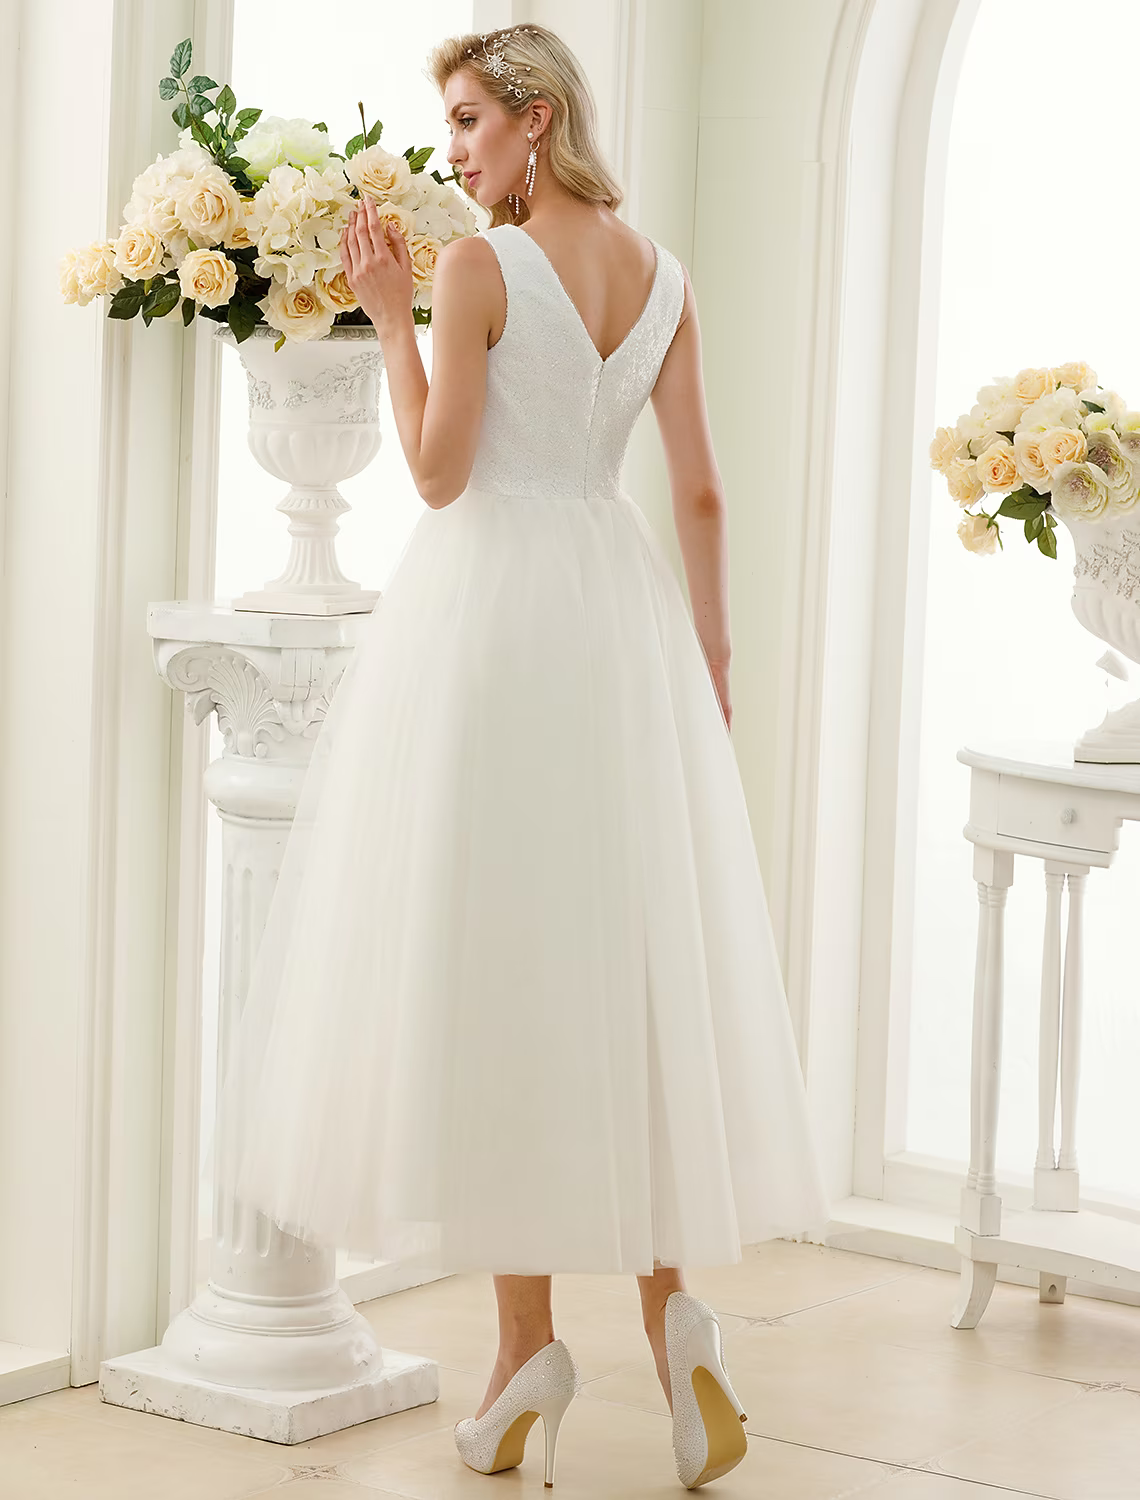 Little White Dresses Wedding Dresses Length A-Line Regular Straps Neck Tulle With Lace Sequin